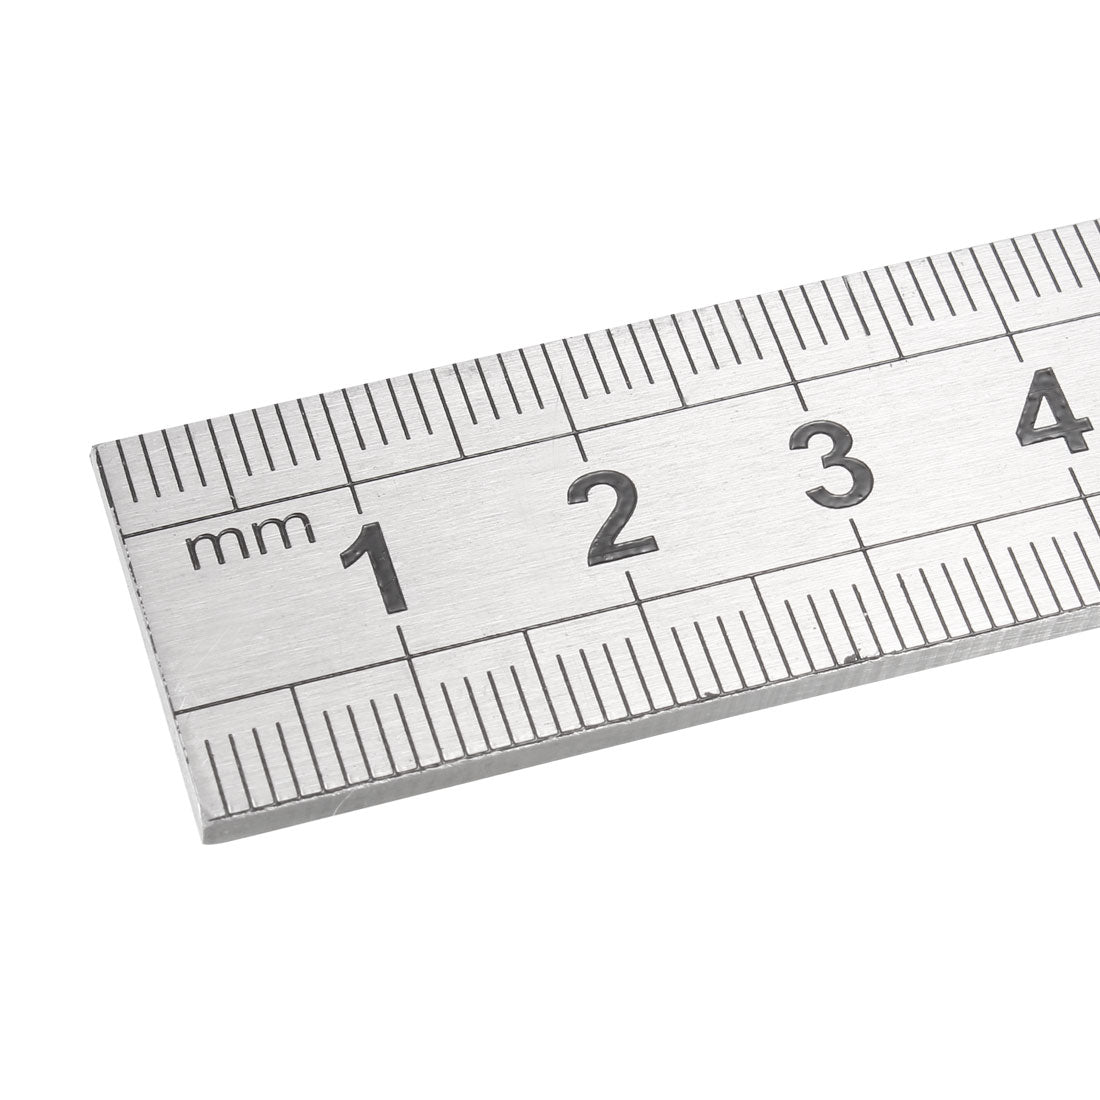 Wood Ruler 15cm 6 Inch 2 Scale Office Rulers Wooden Measuring Ruler 8pcs